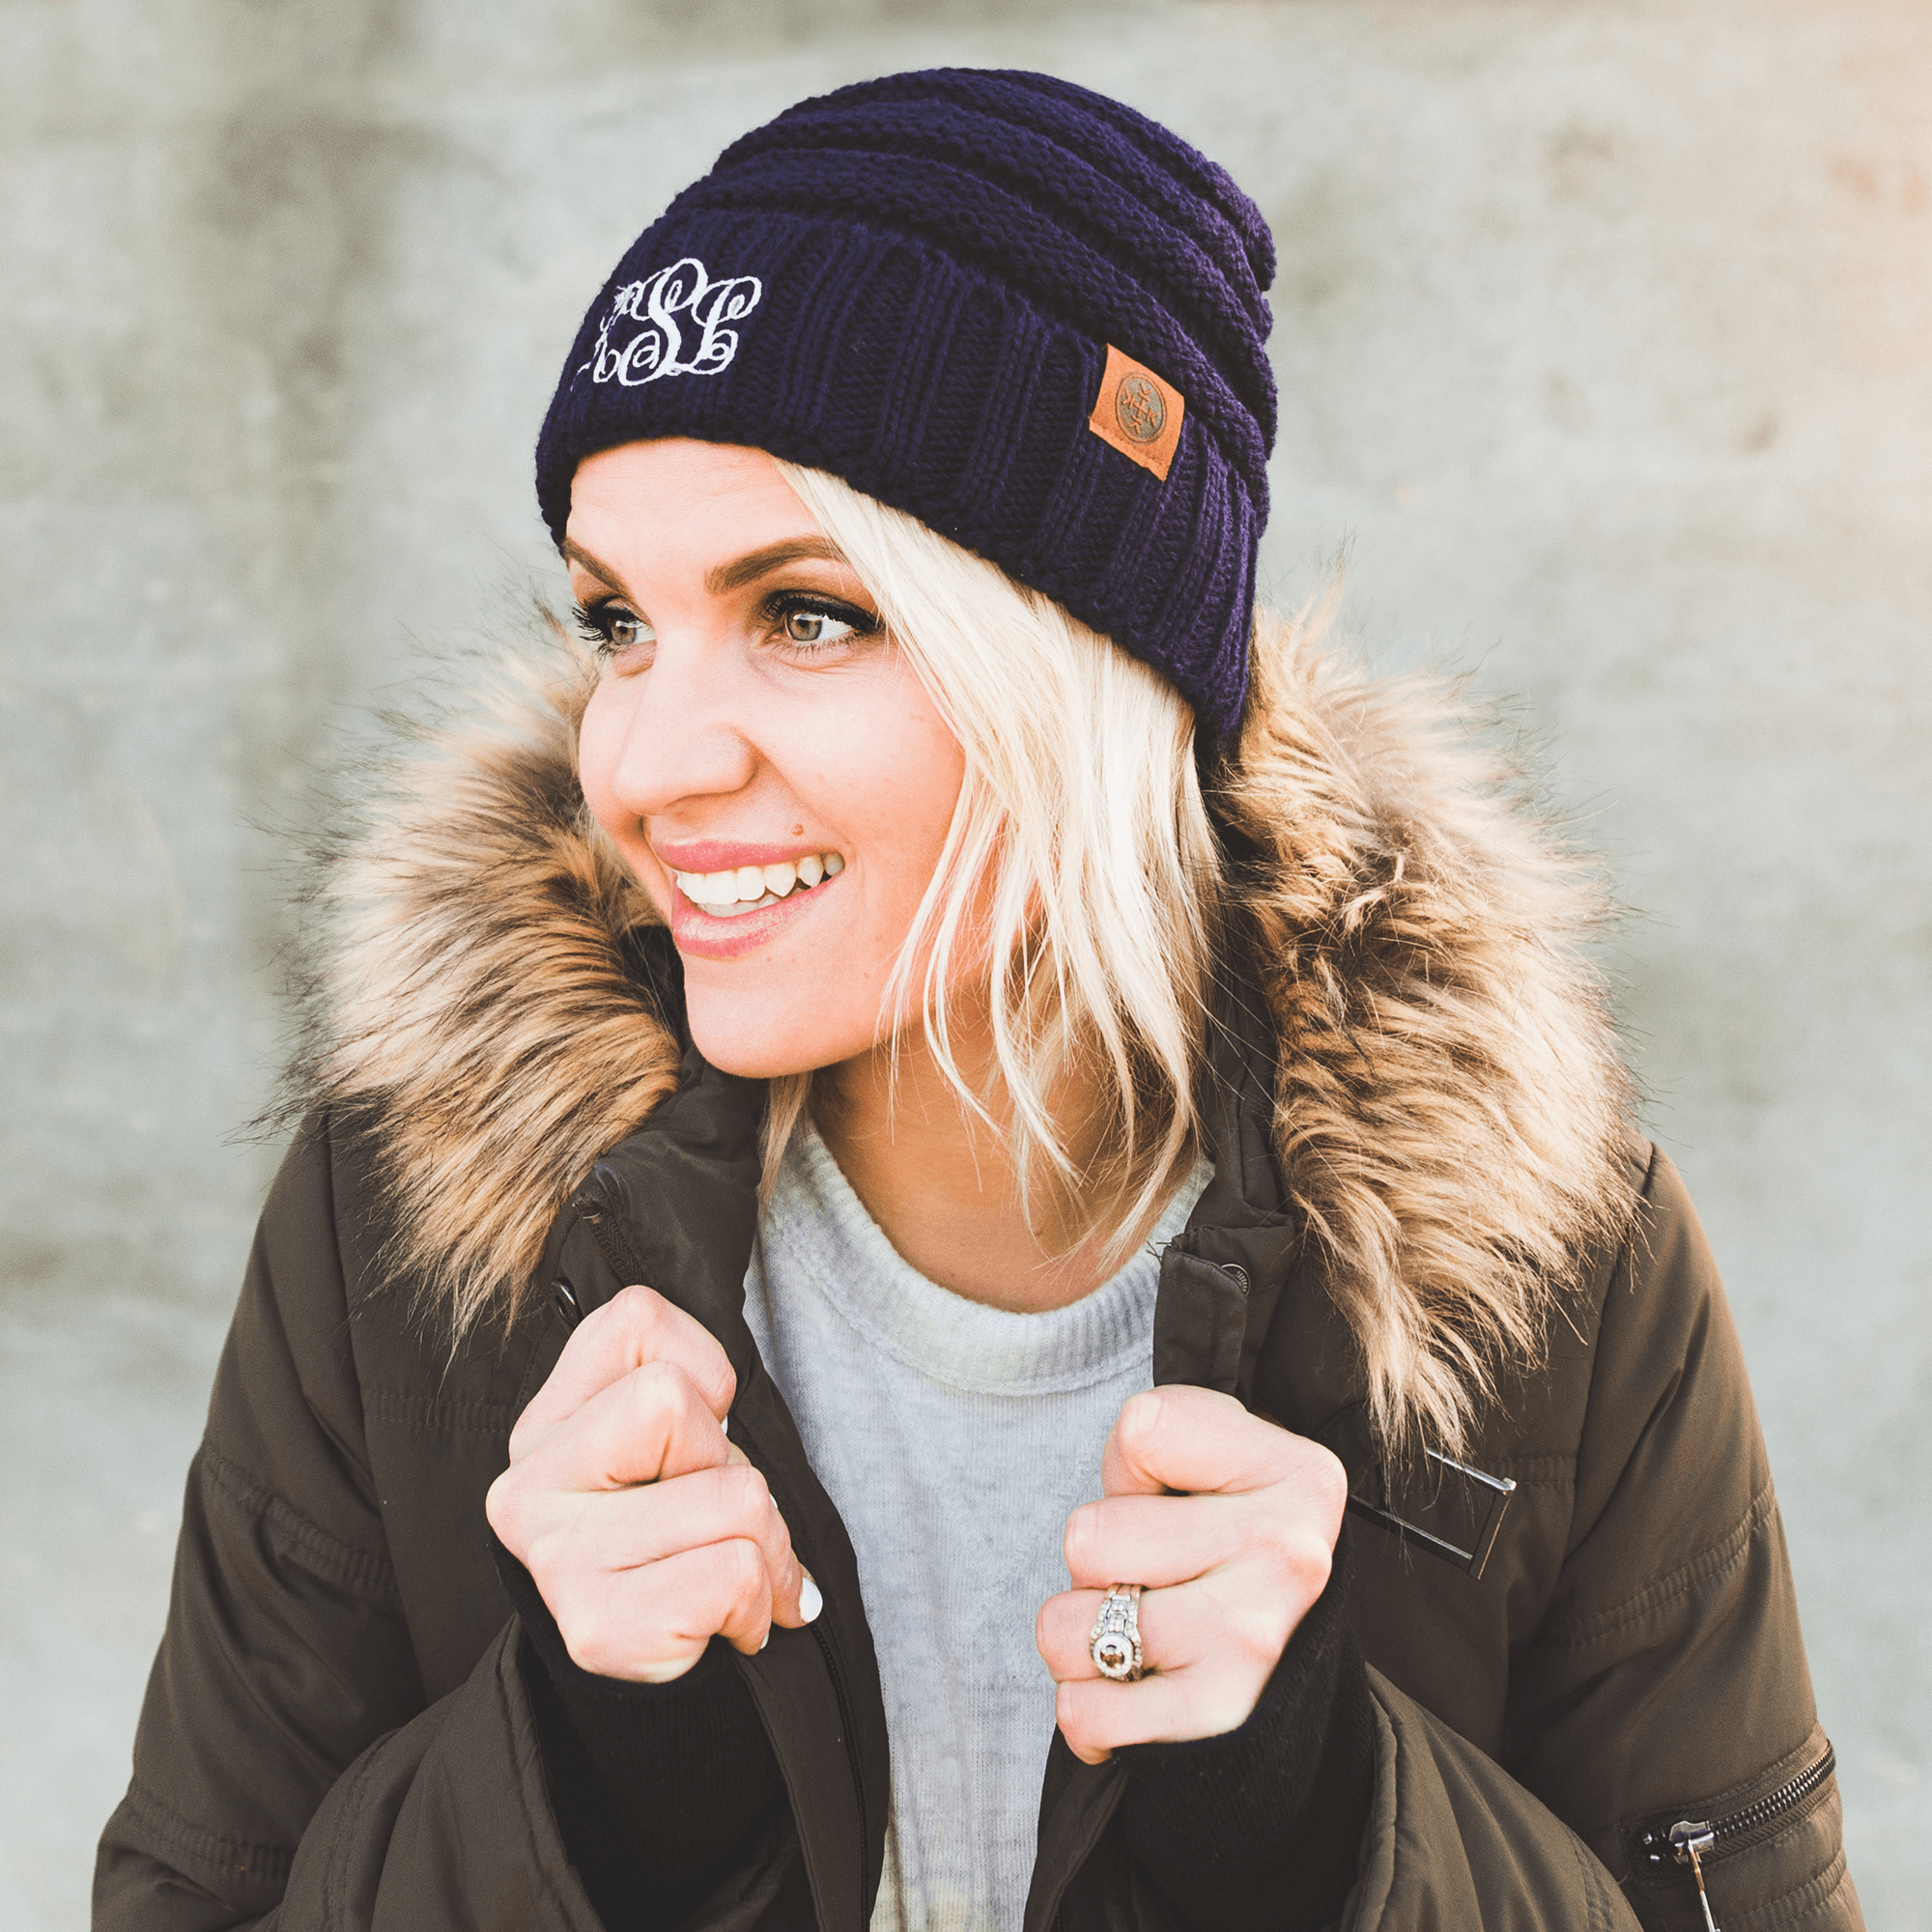 Monogramed Beanies, Gloves and Scarves